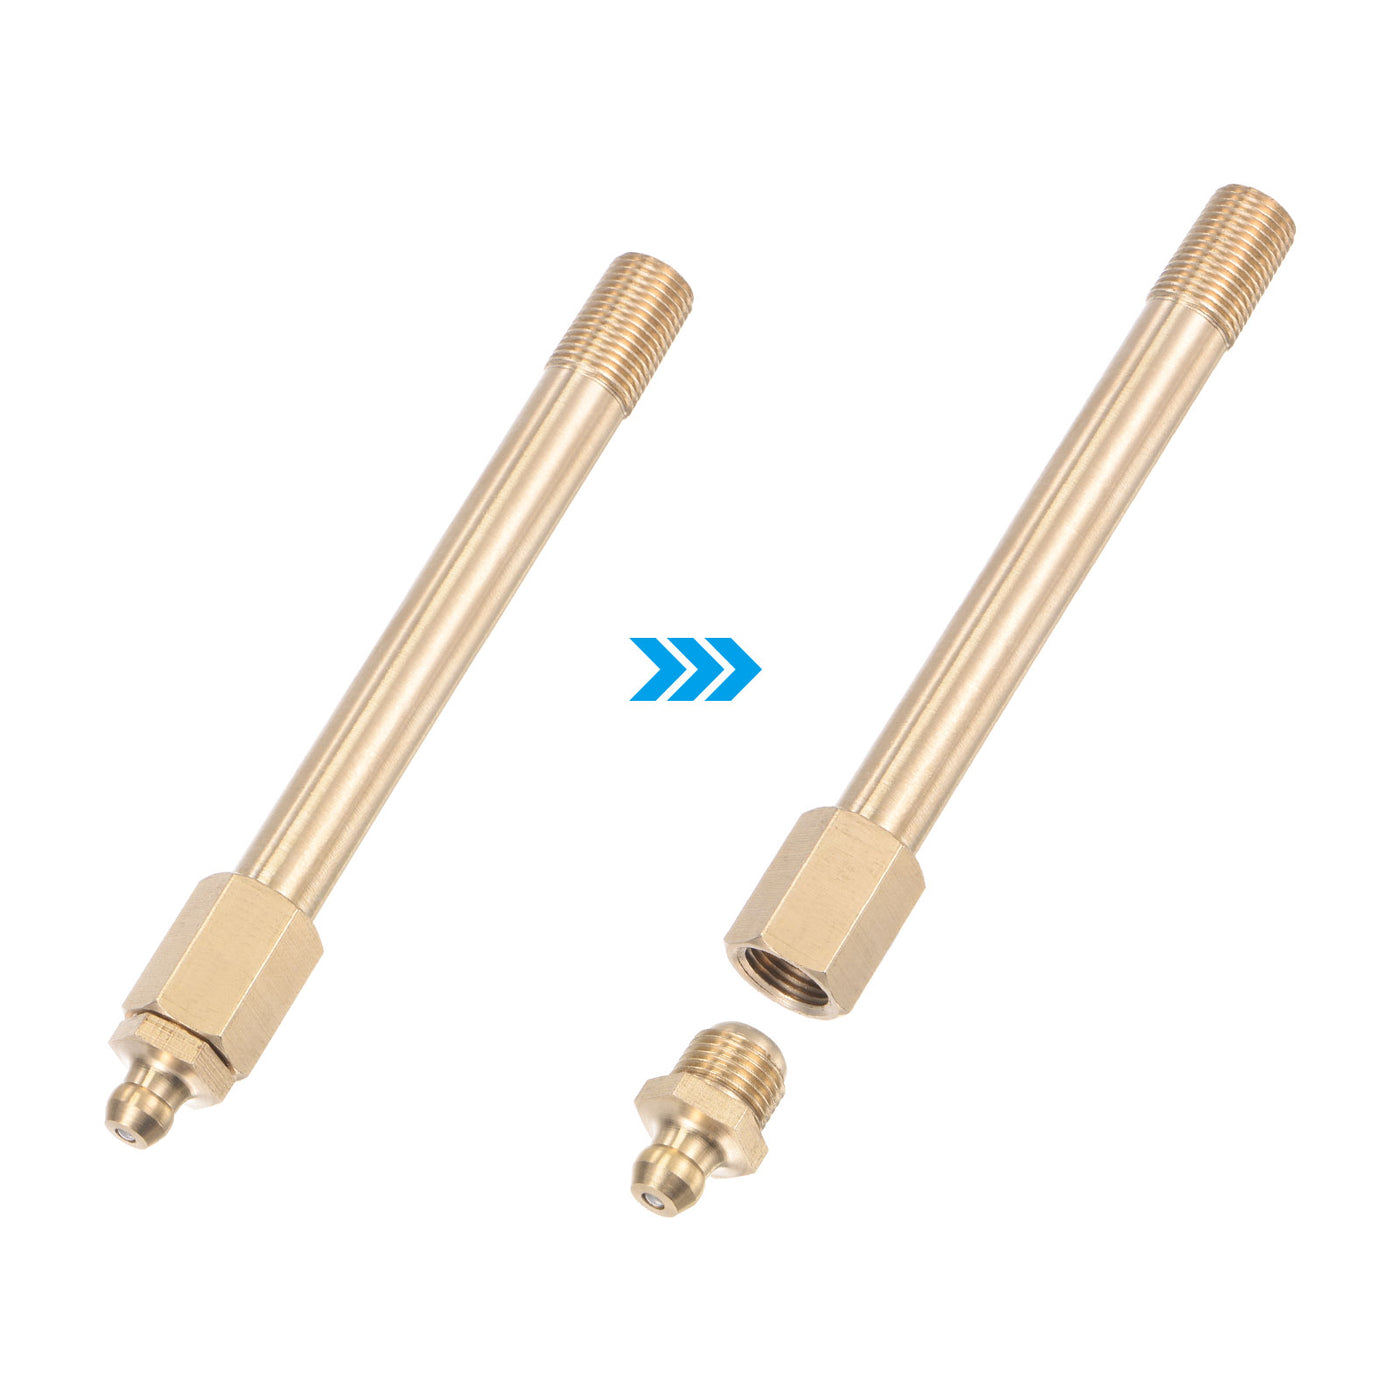 uxcell Uxcell Brass Straight Hydraulic Grease Fitting G1/8 Thread 110mm Length, 2Pcs